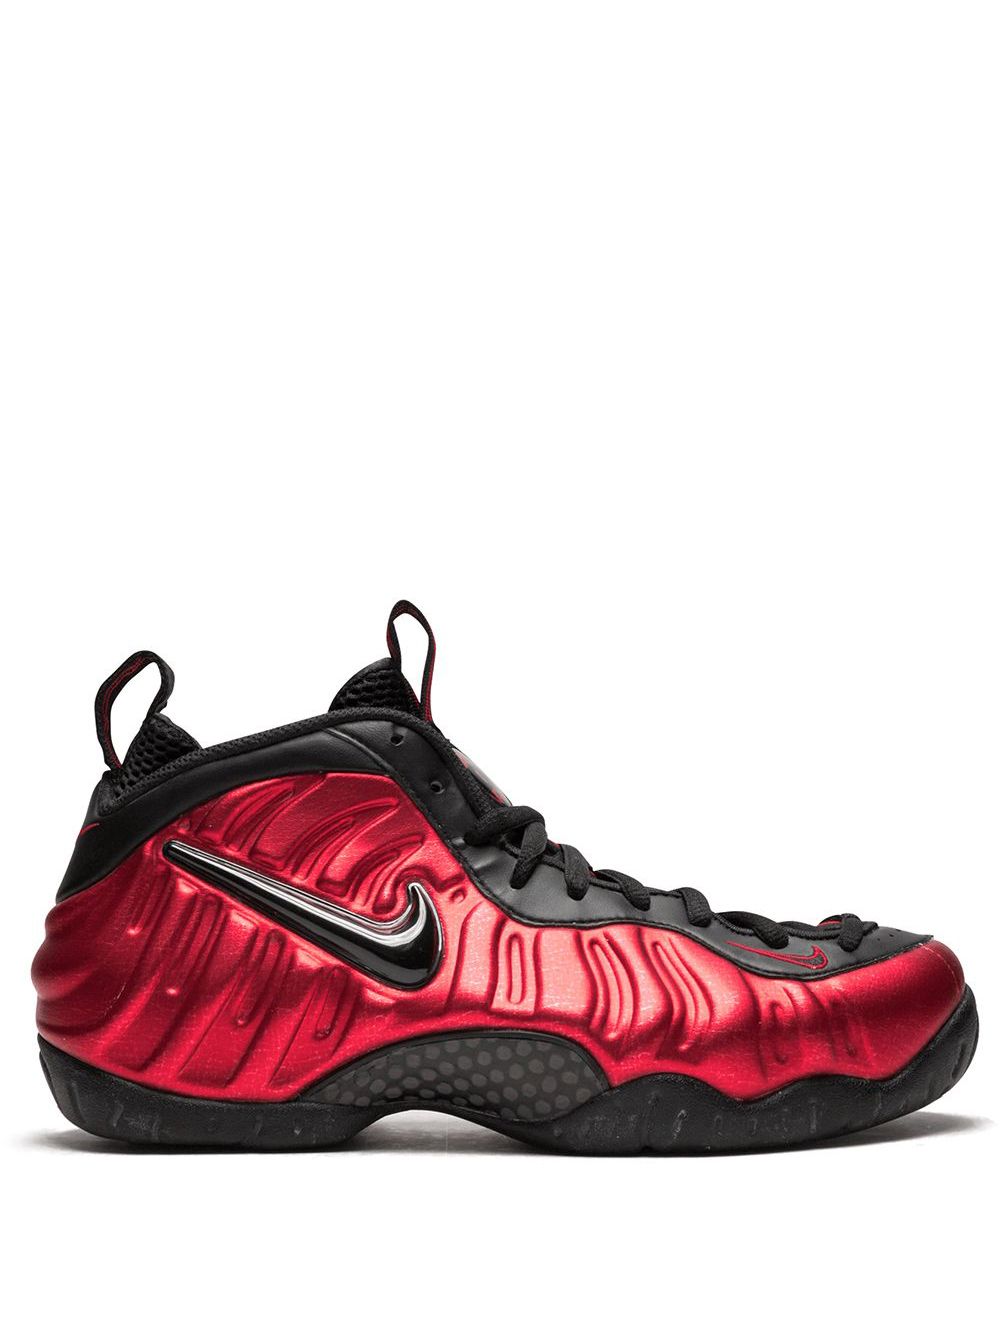 The Nike Foamposite Pro 'University Red' is Available Now